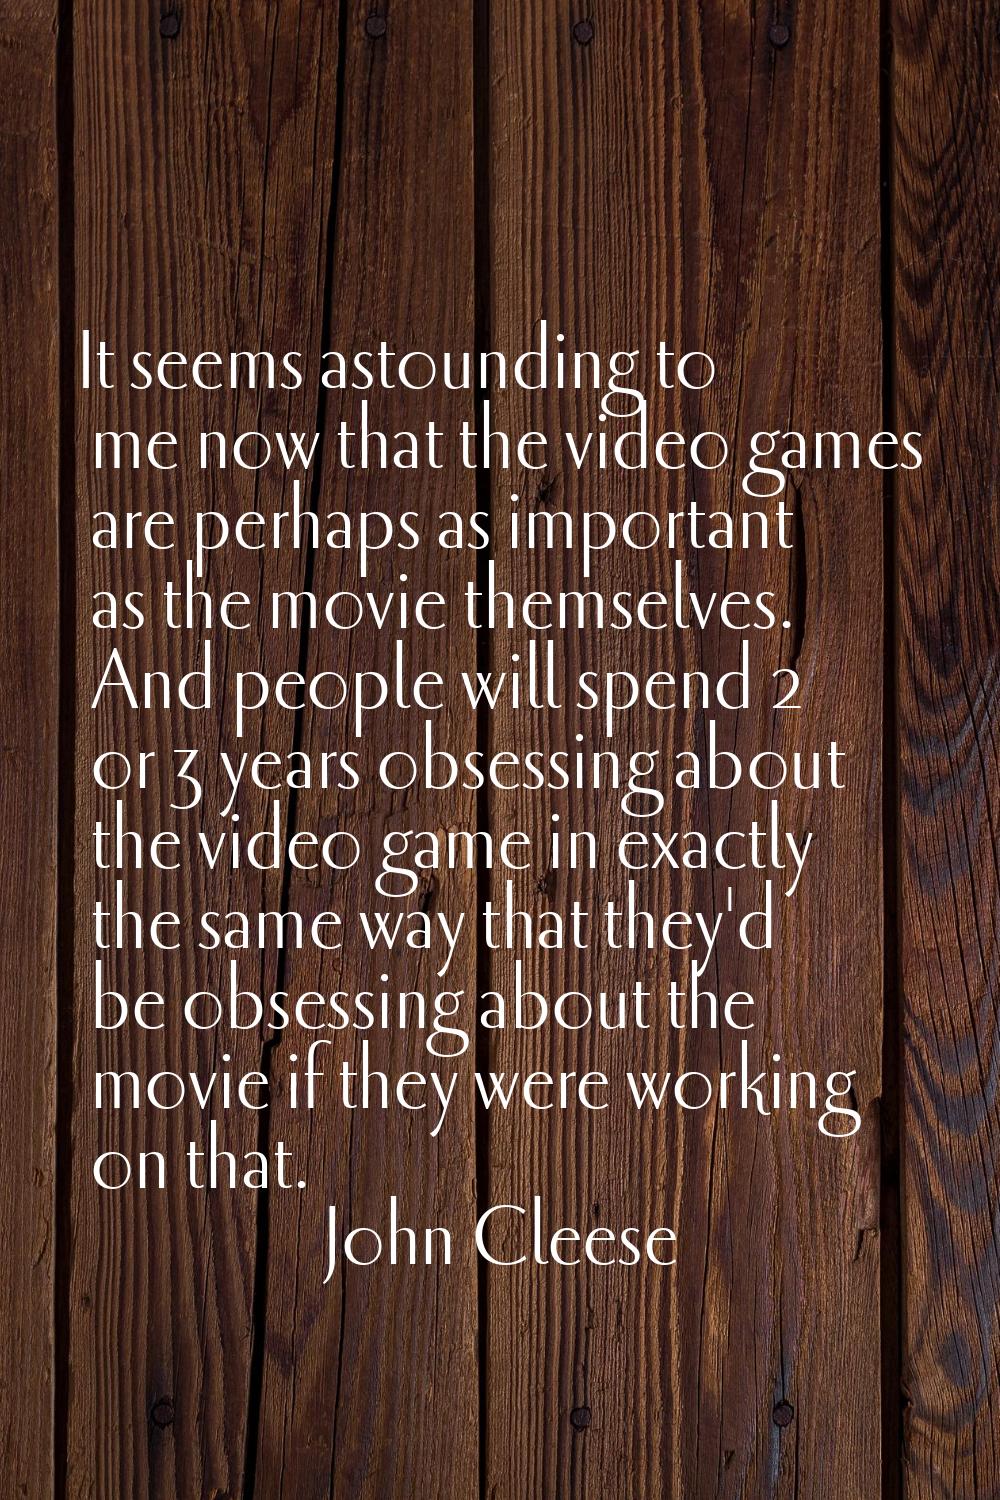 It seems astounding to me now that the video games are perhaps as important as the movie themselves